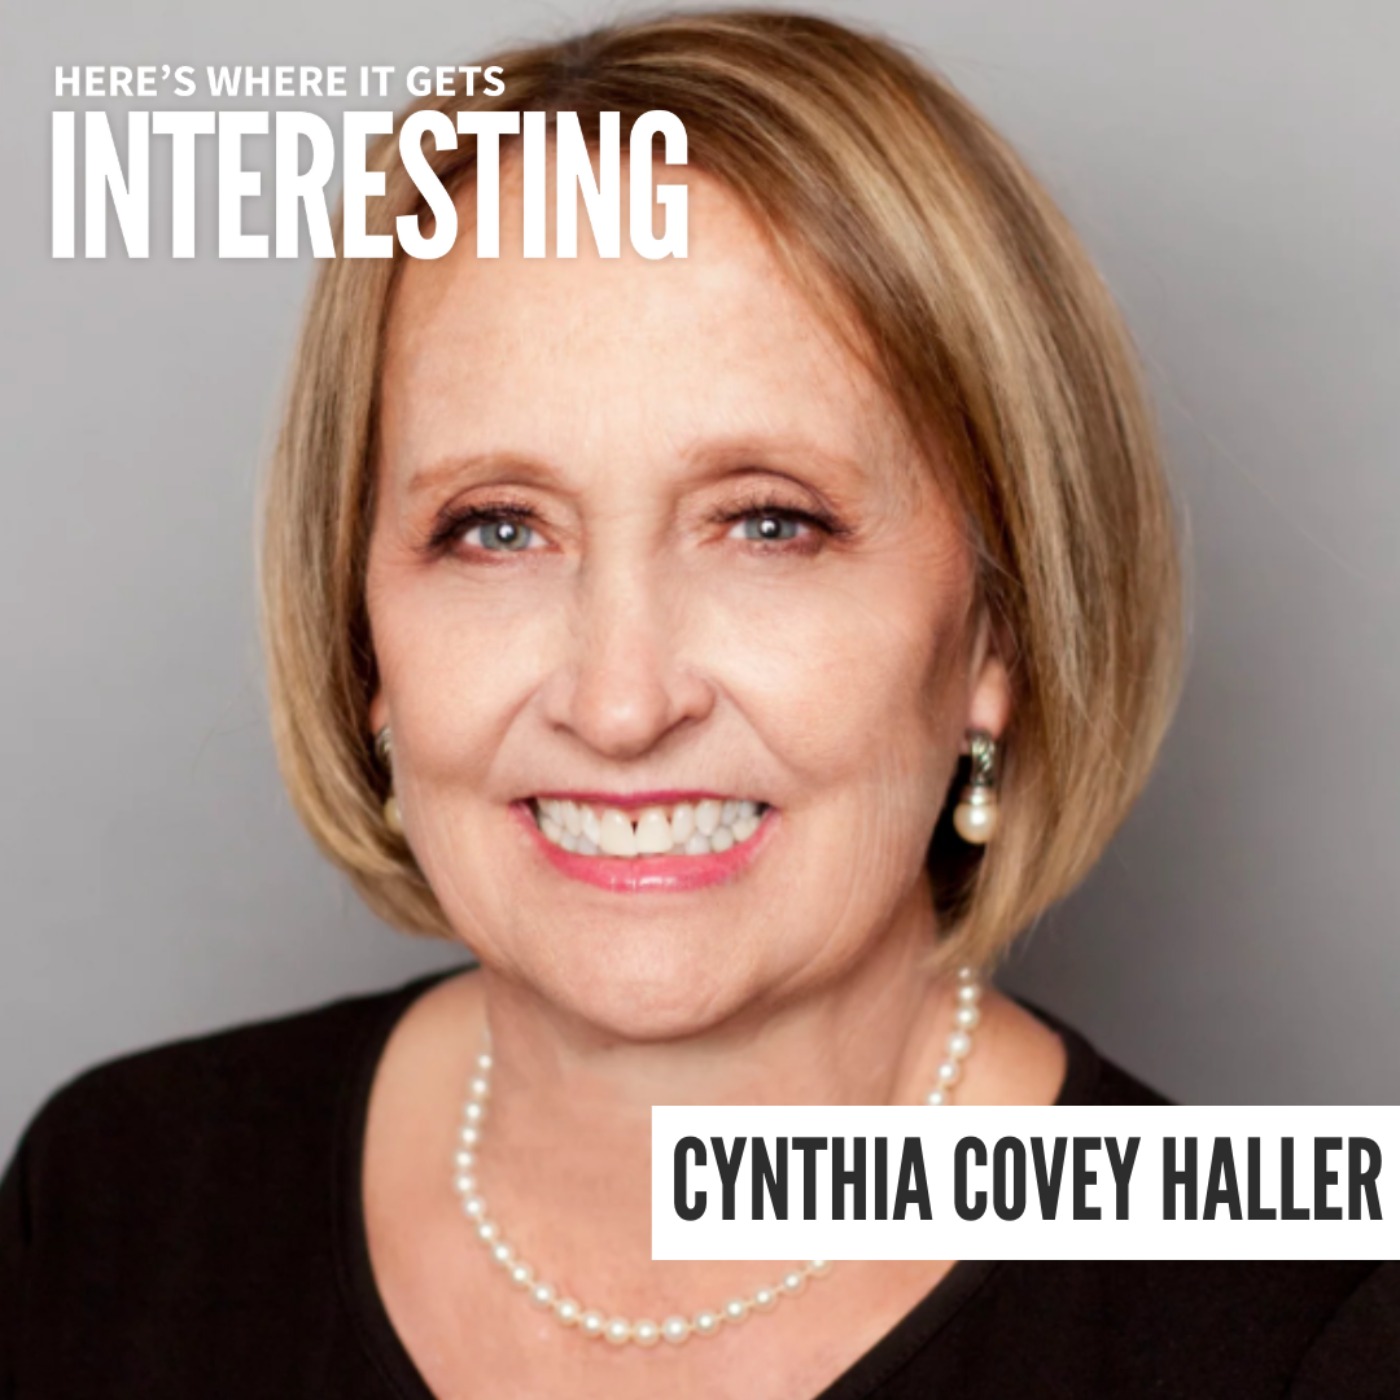 Live Life in Crescendo with Cynthia Covey Haller